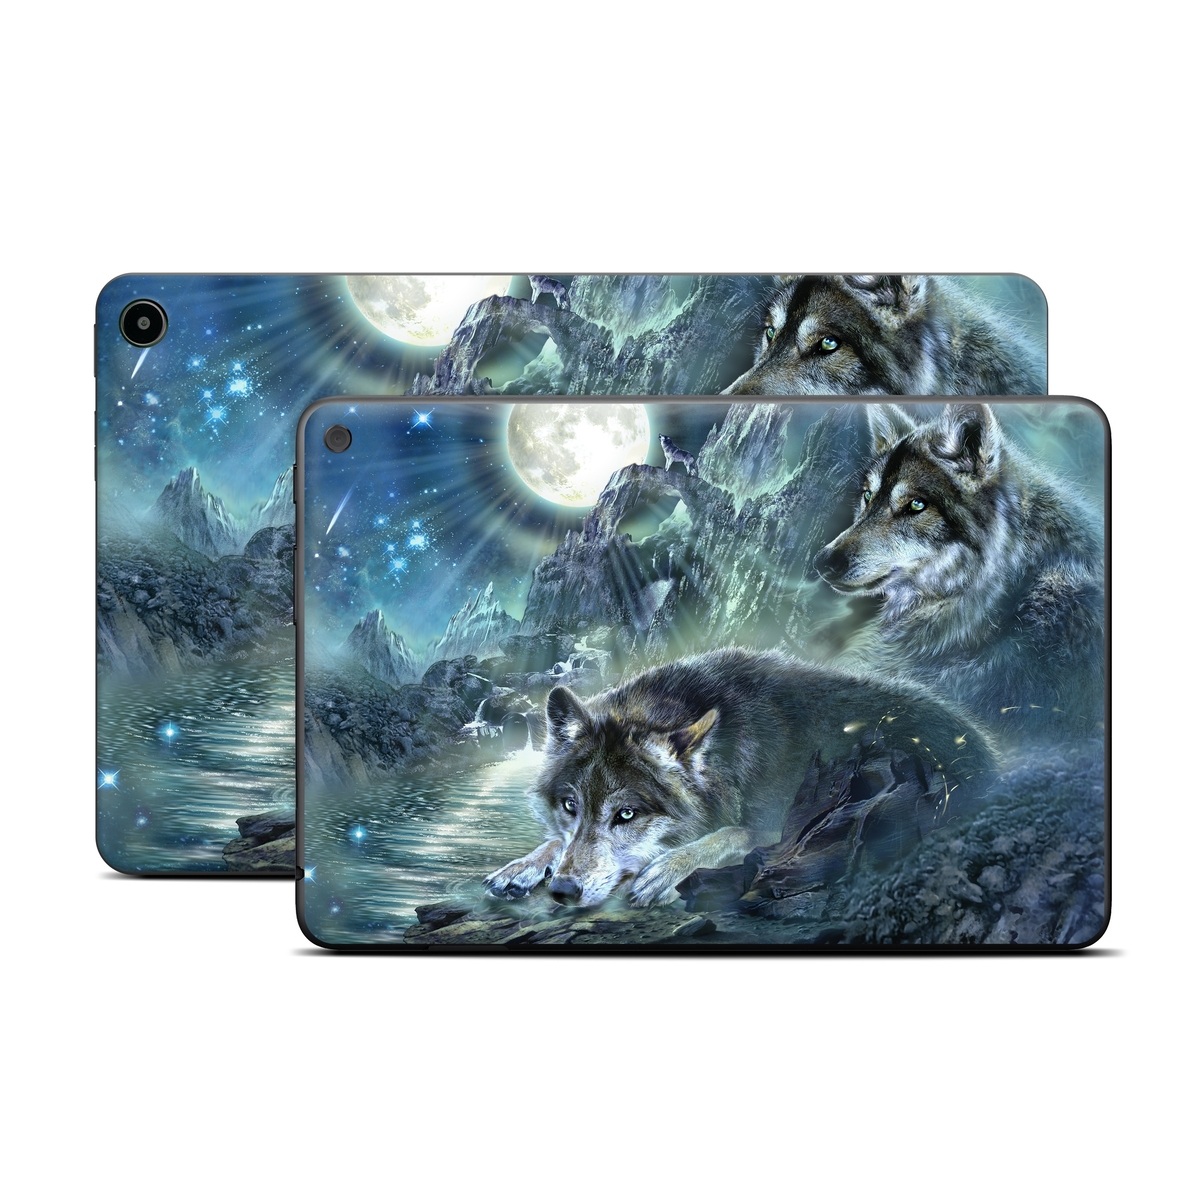  Skin design of Cg artwork, Fictional character, Darkness, Werewolf, Illustration, Wolf, Mythical creature, Graphic design, Dragon, Mythology, with black, blue, gray, white colors